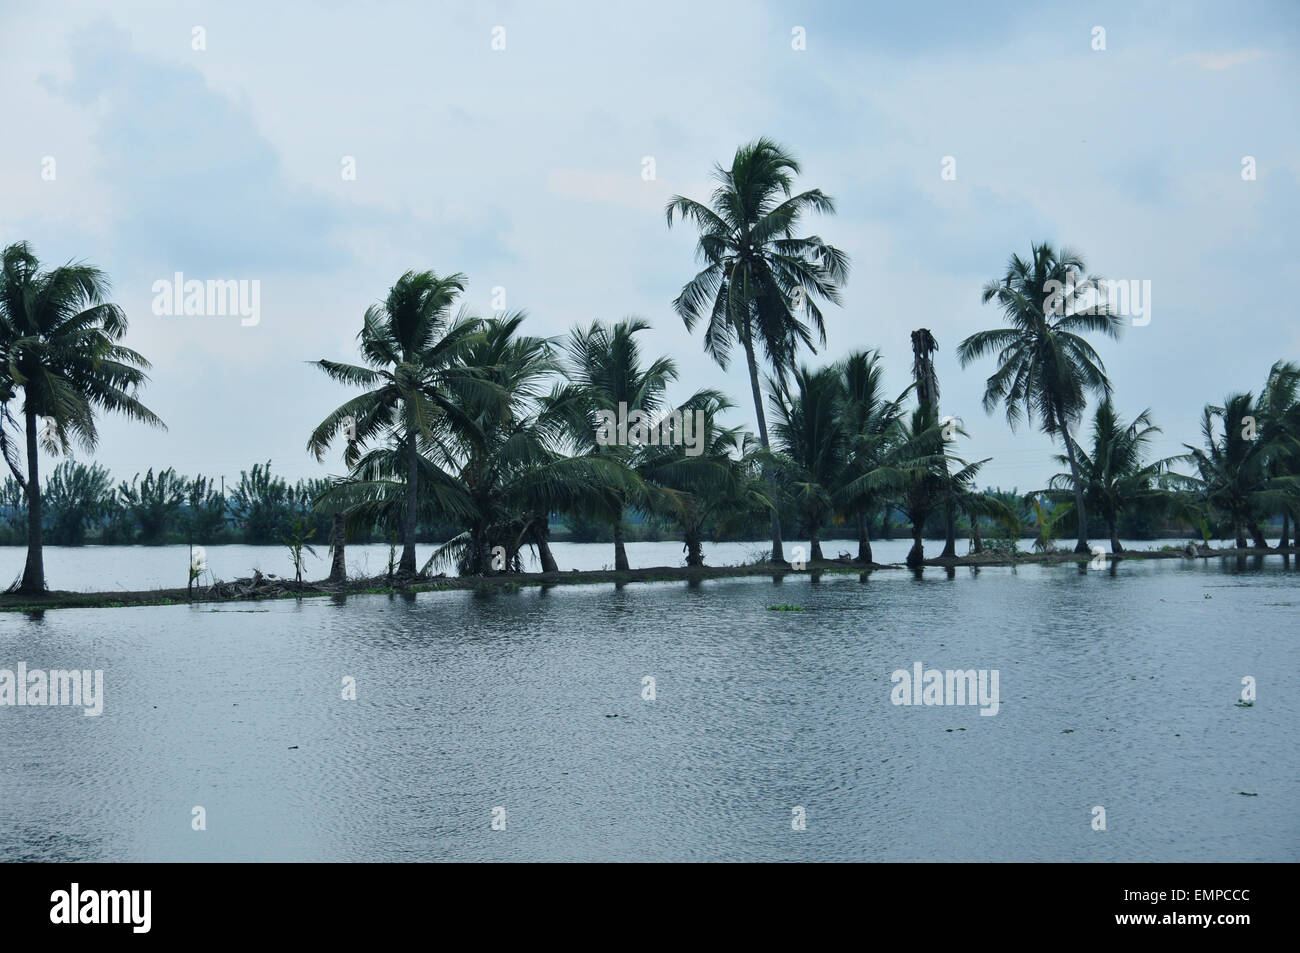 coconut trees in water. Stock Photo